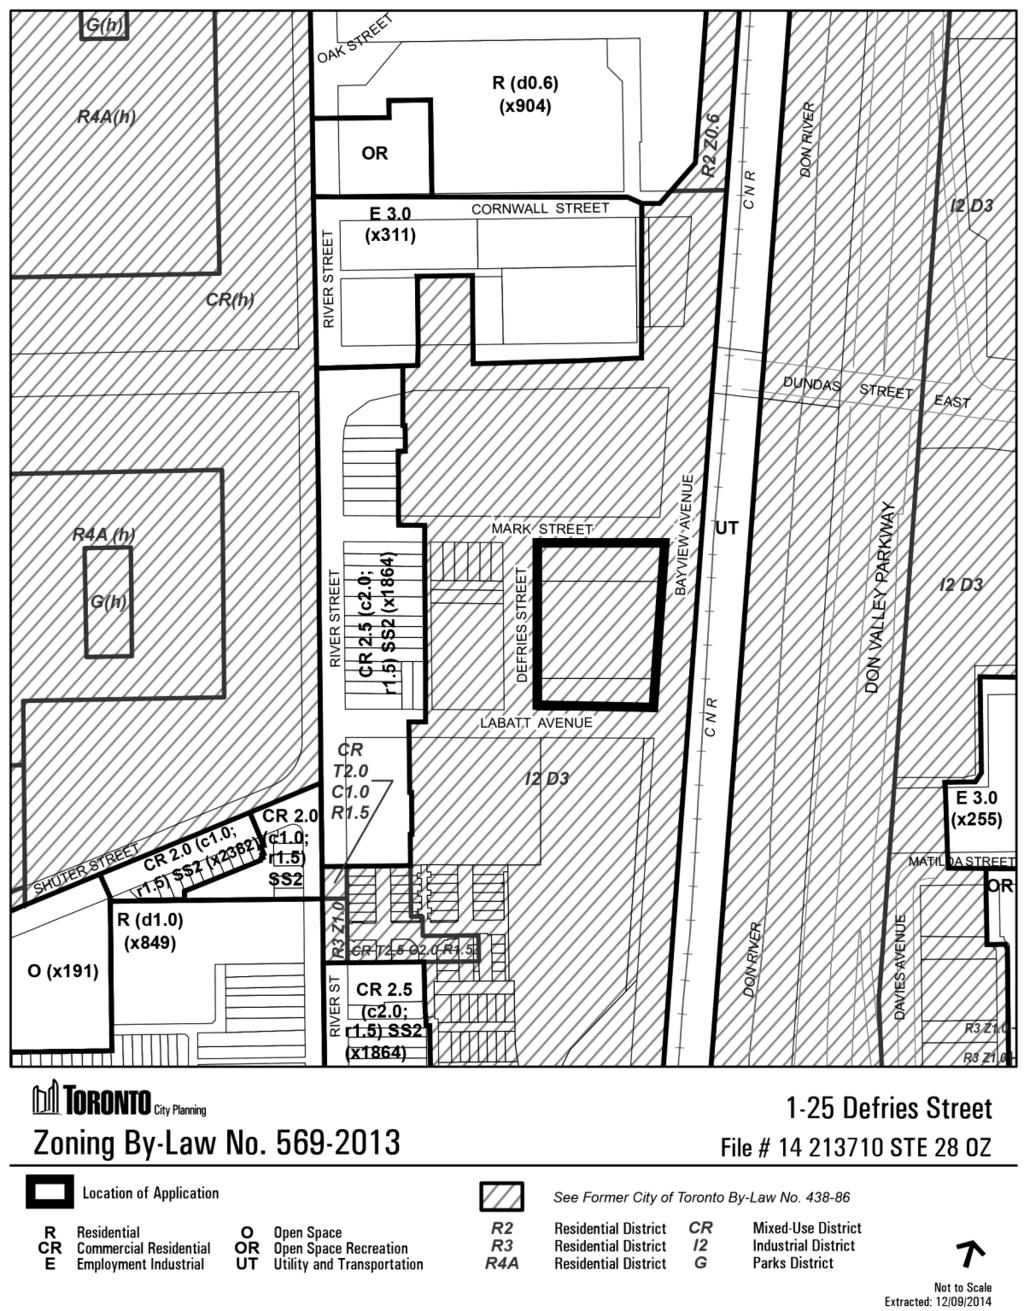 Attachment 3: Zoning Staff Report for